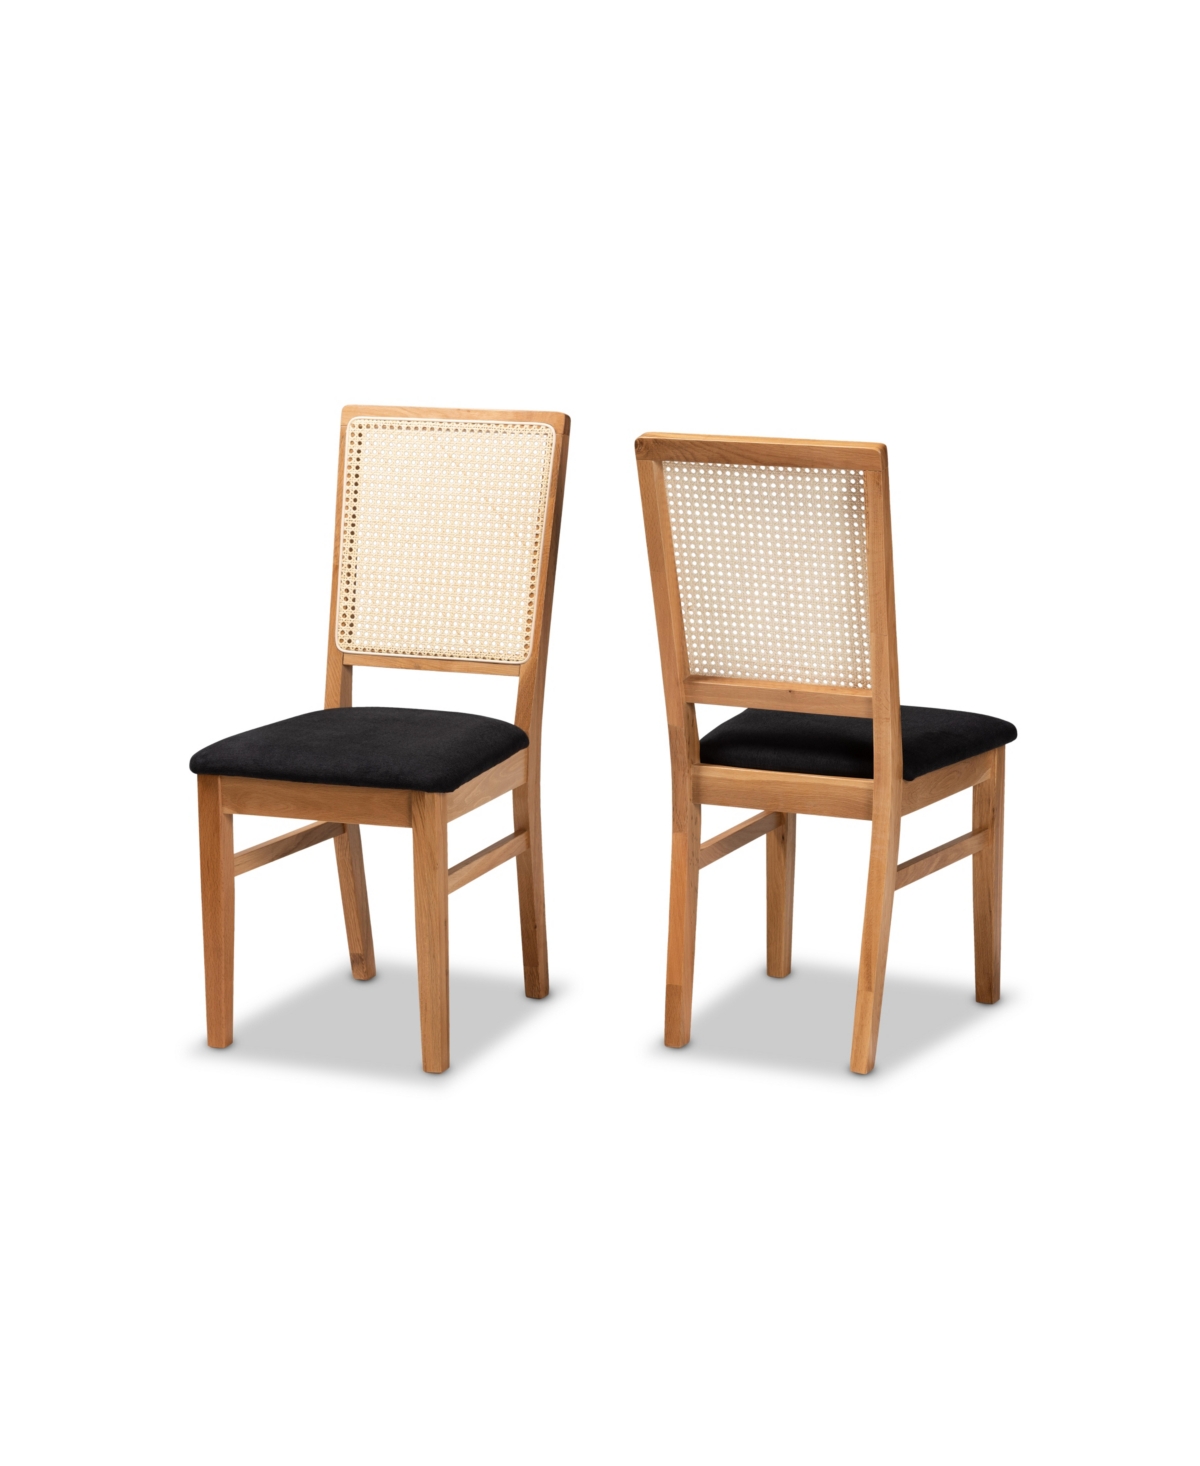 Baxton Studio Idris Mid-century Modern Fabric Upholstered And Oak Finished 2-piece Rattan Dining Chair Set In Black,oak Brown